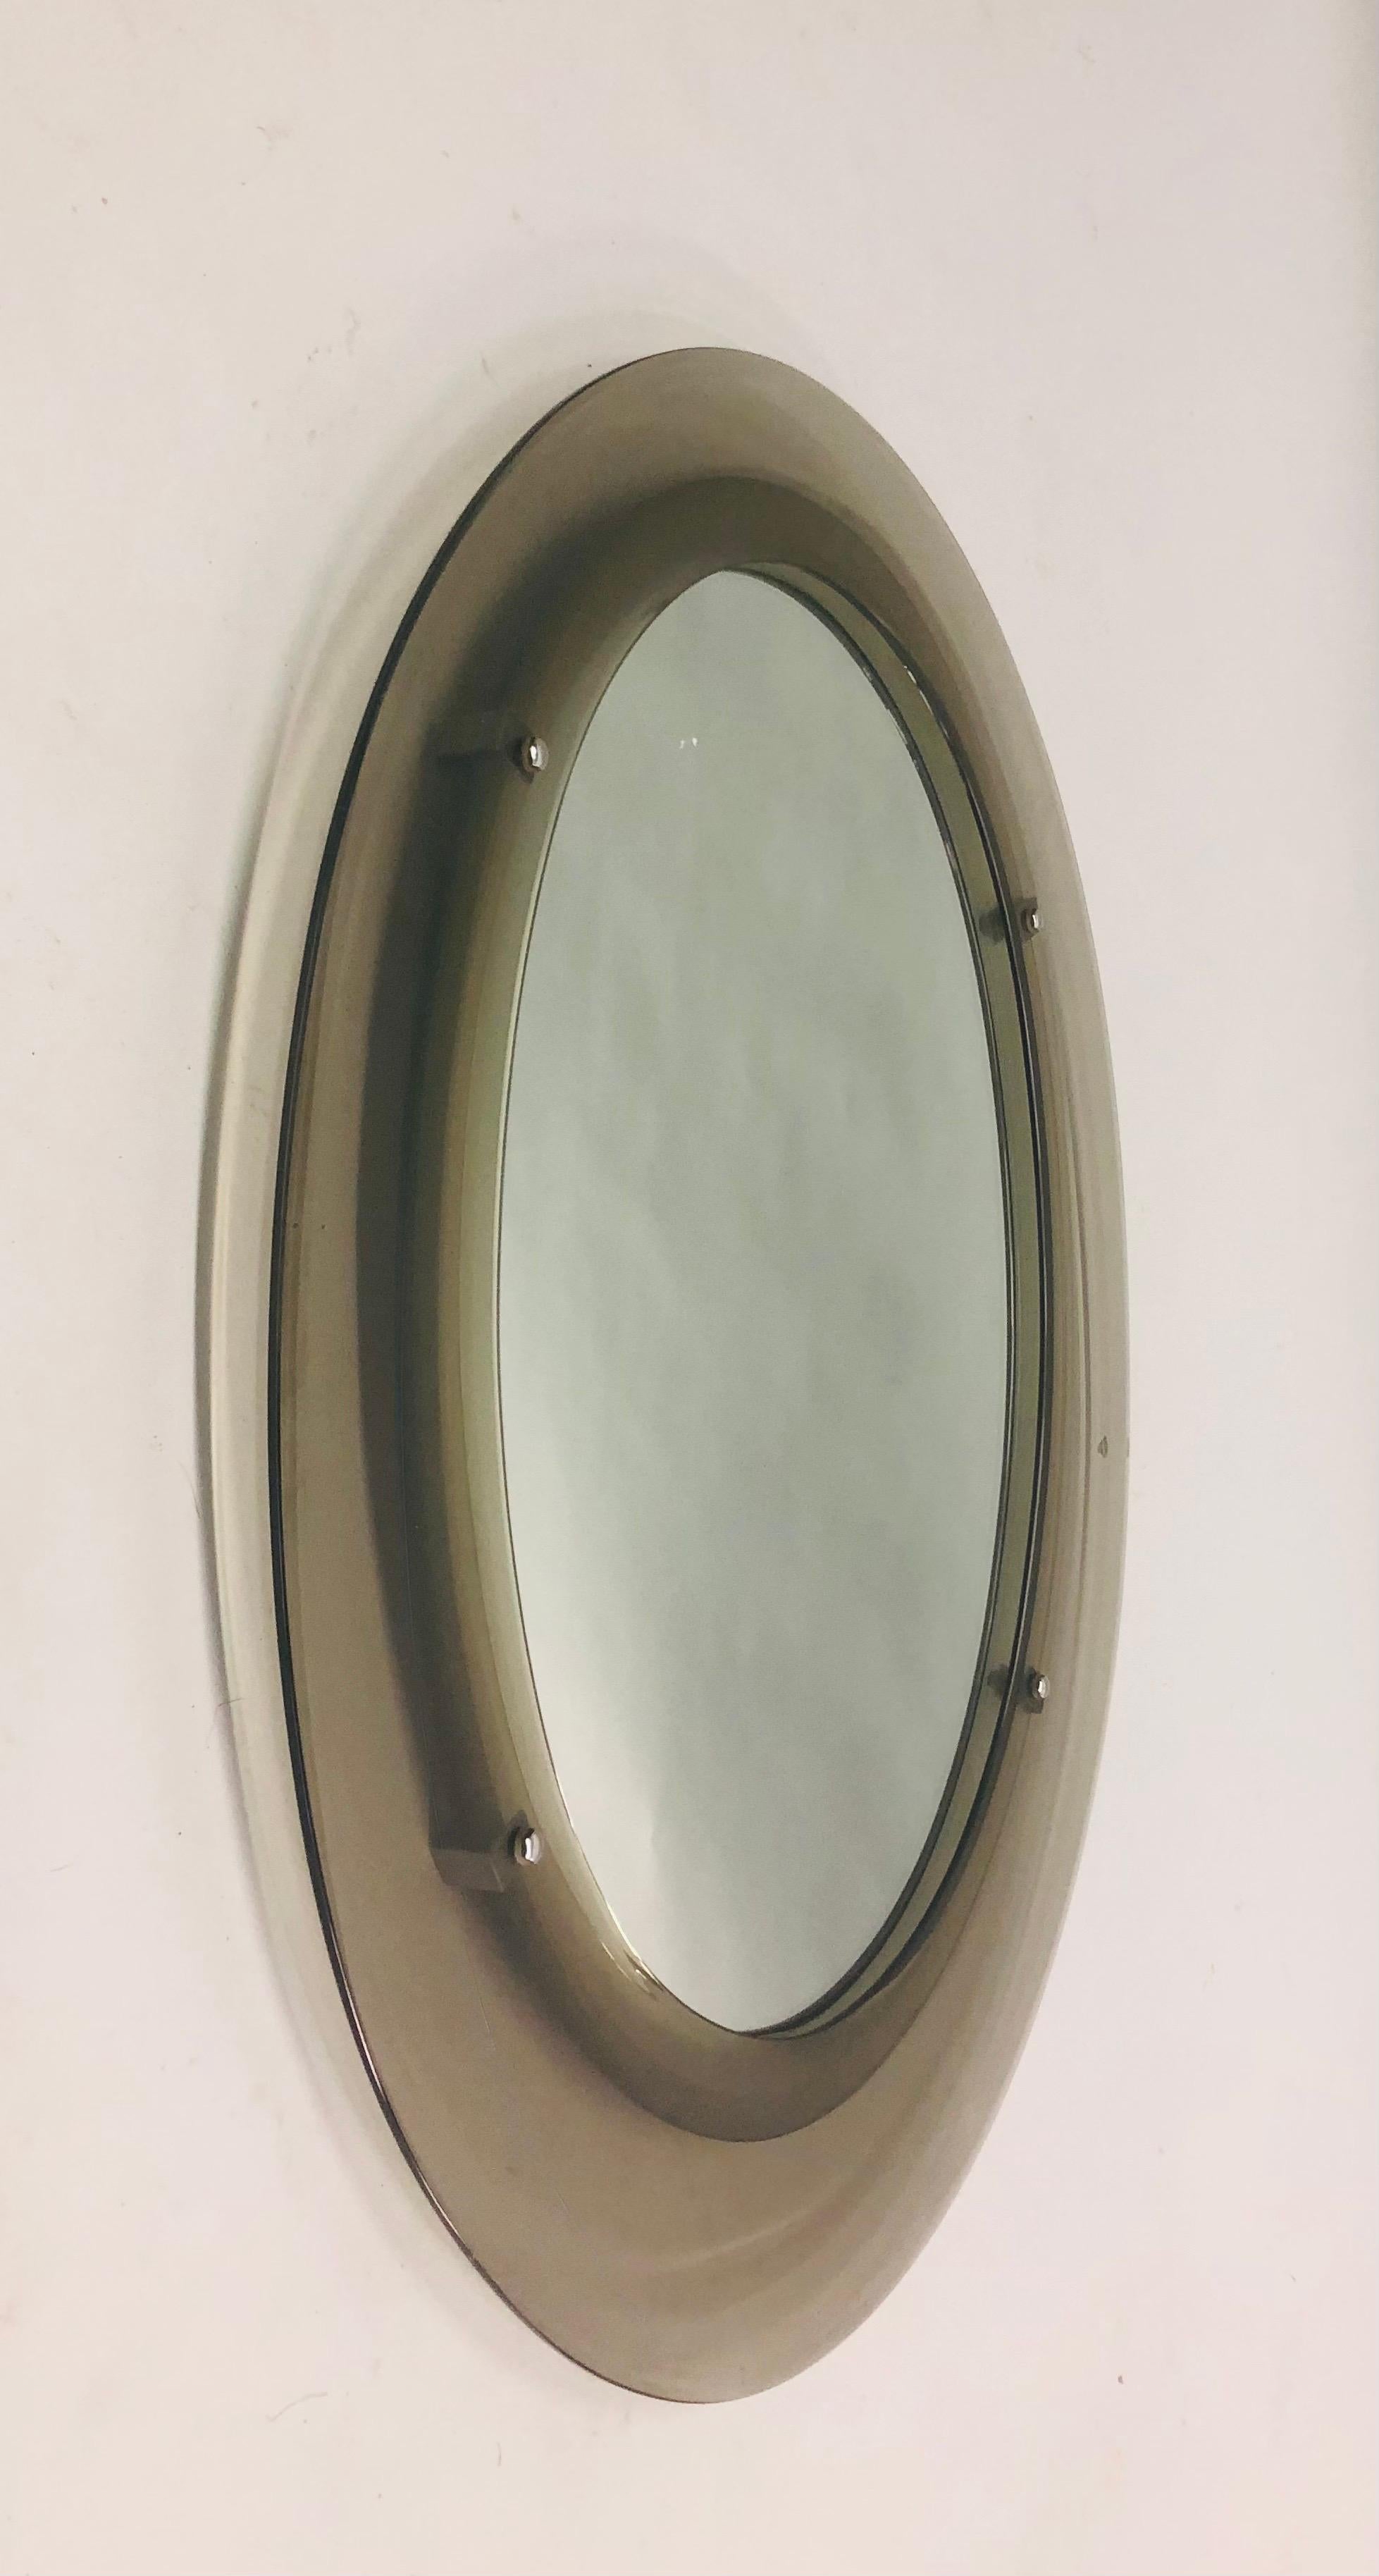 Hand-Crafted Italian Midcentury Ovoid Gray Glass Mirror, Attr. Max Ingrand for Fontana Arte